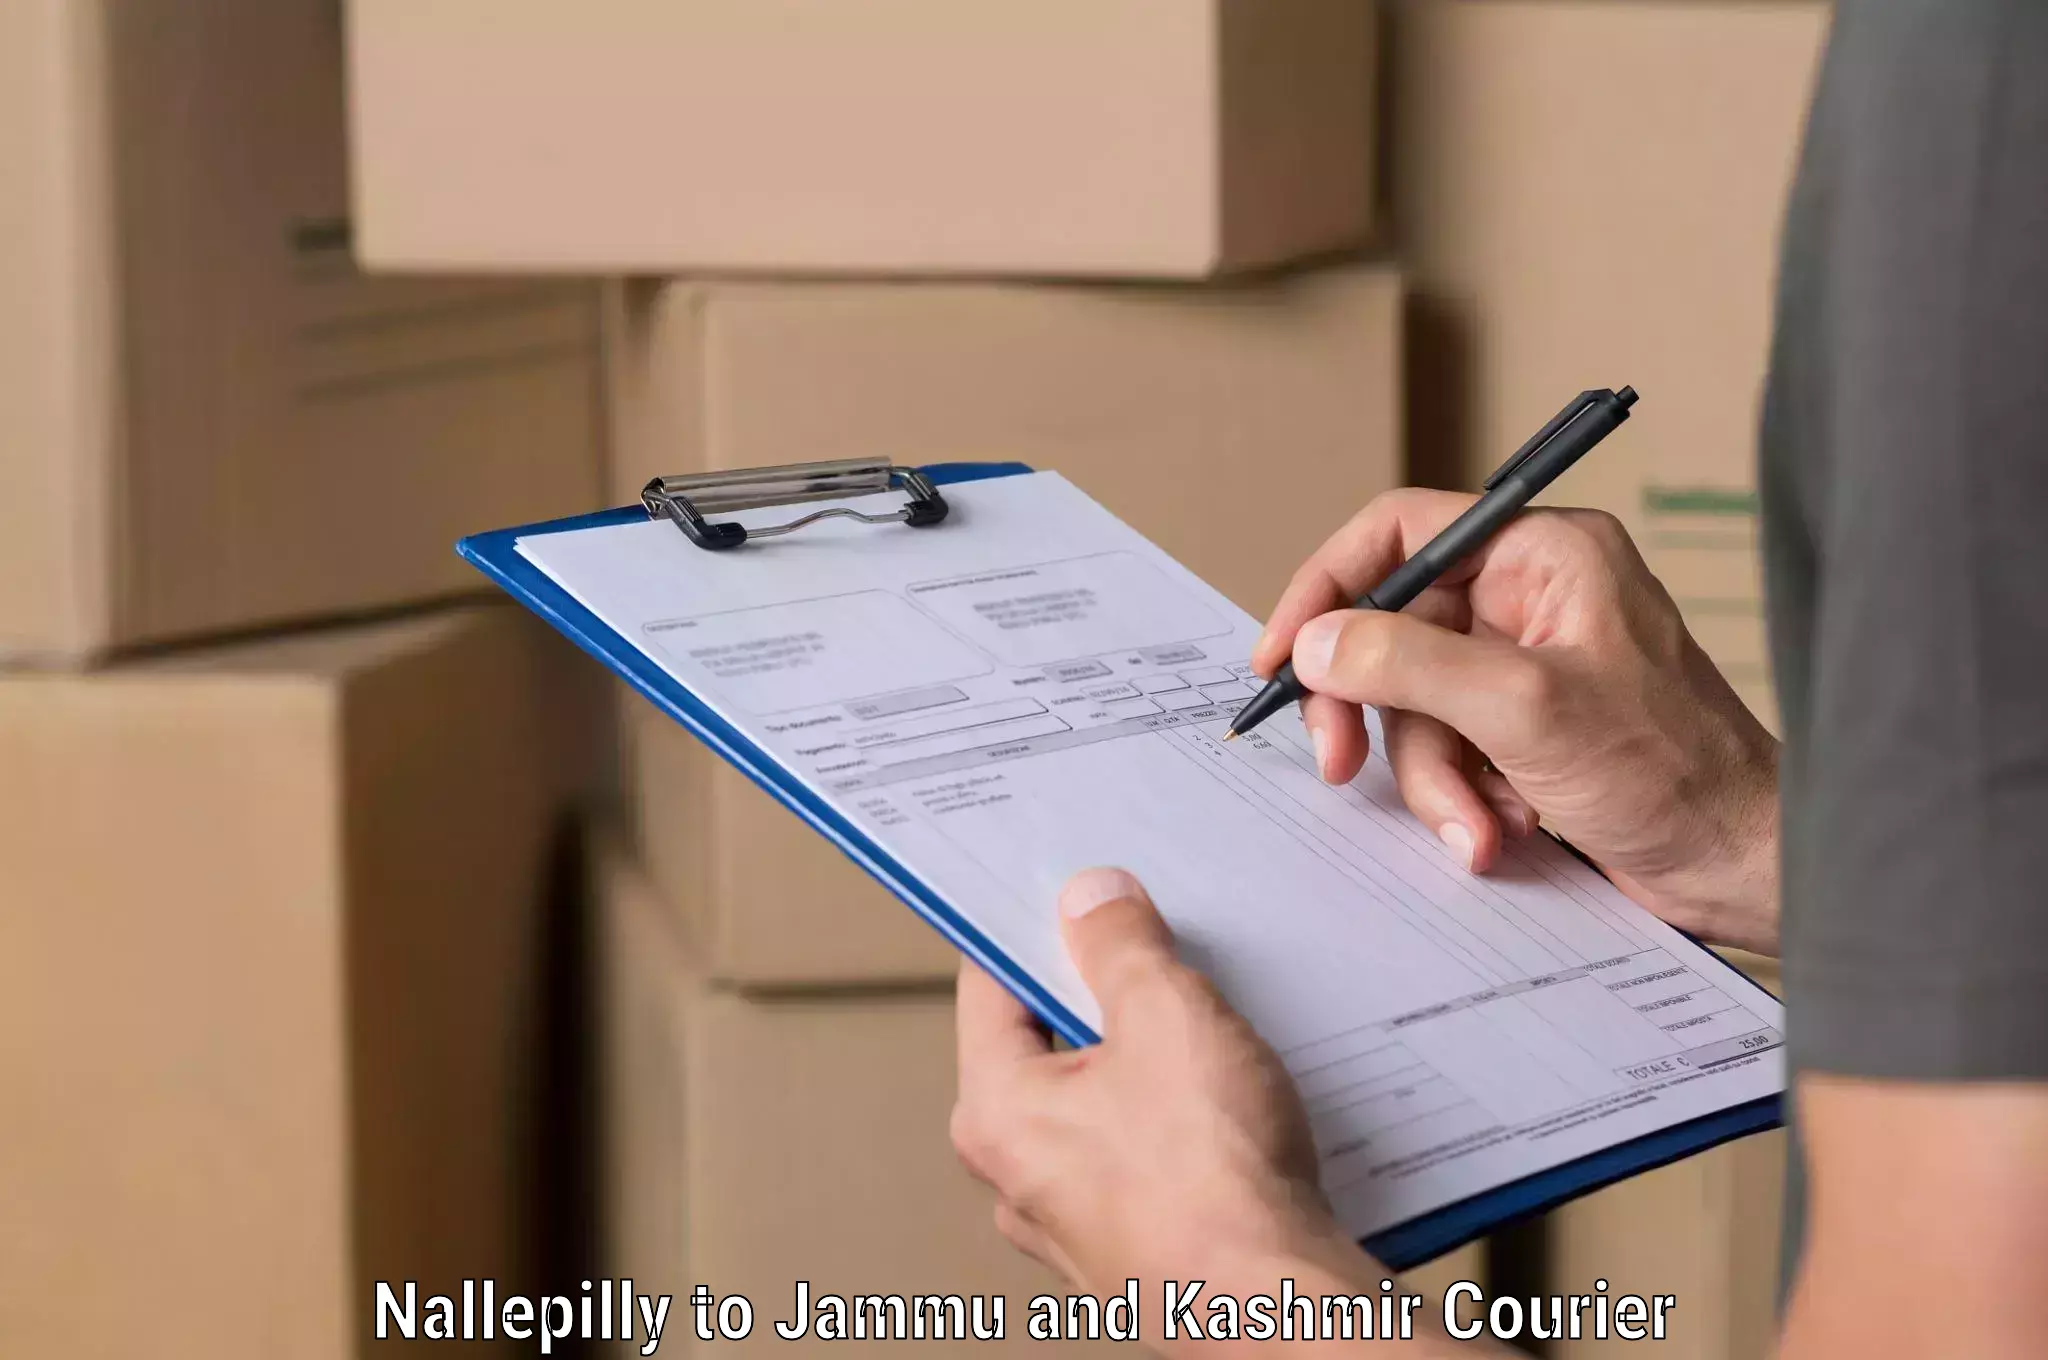 High-speed parcel service Nallepilly to Anantnag